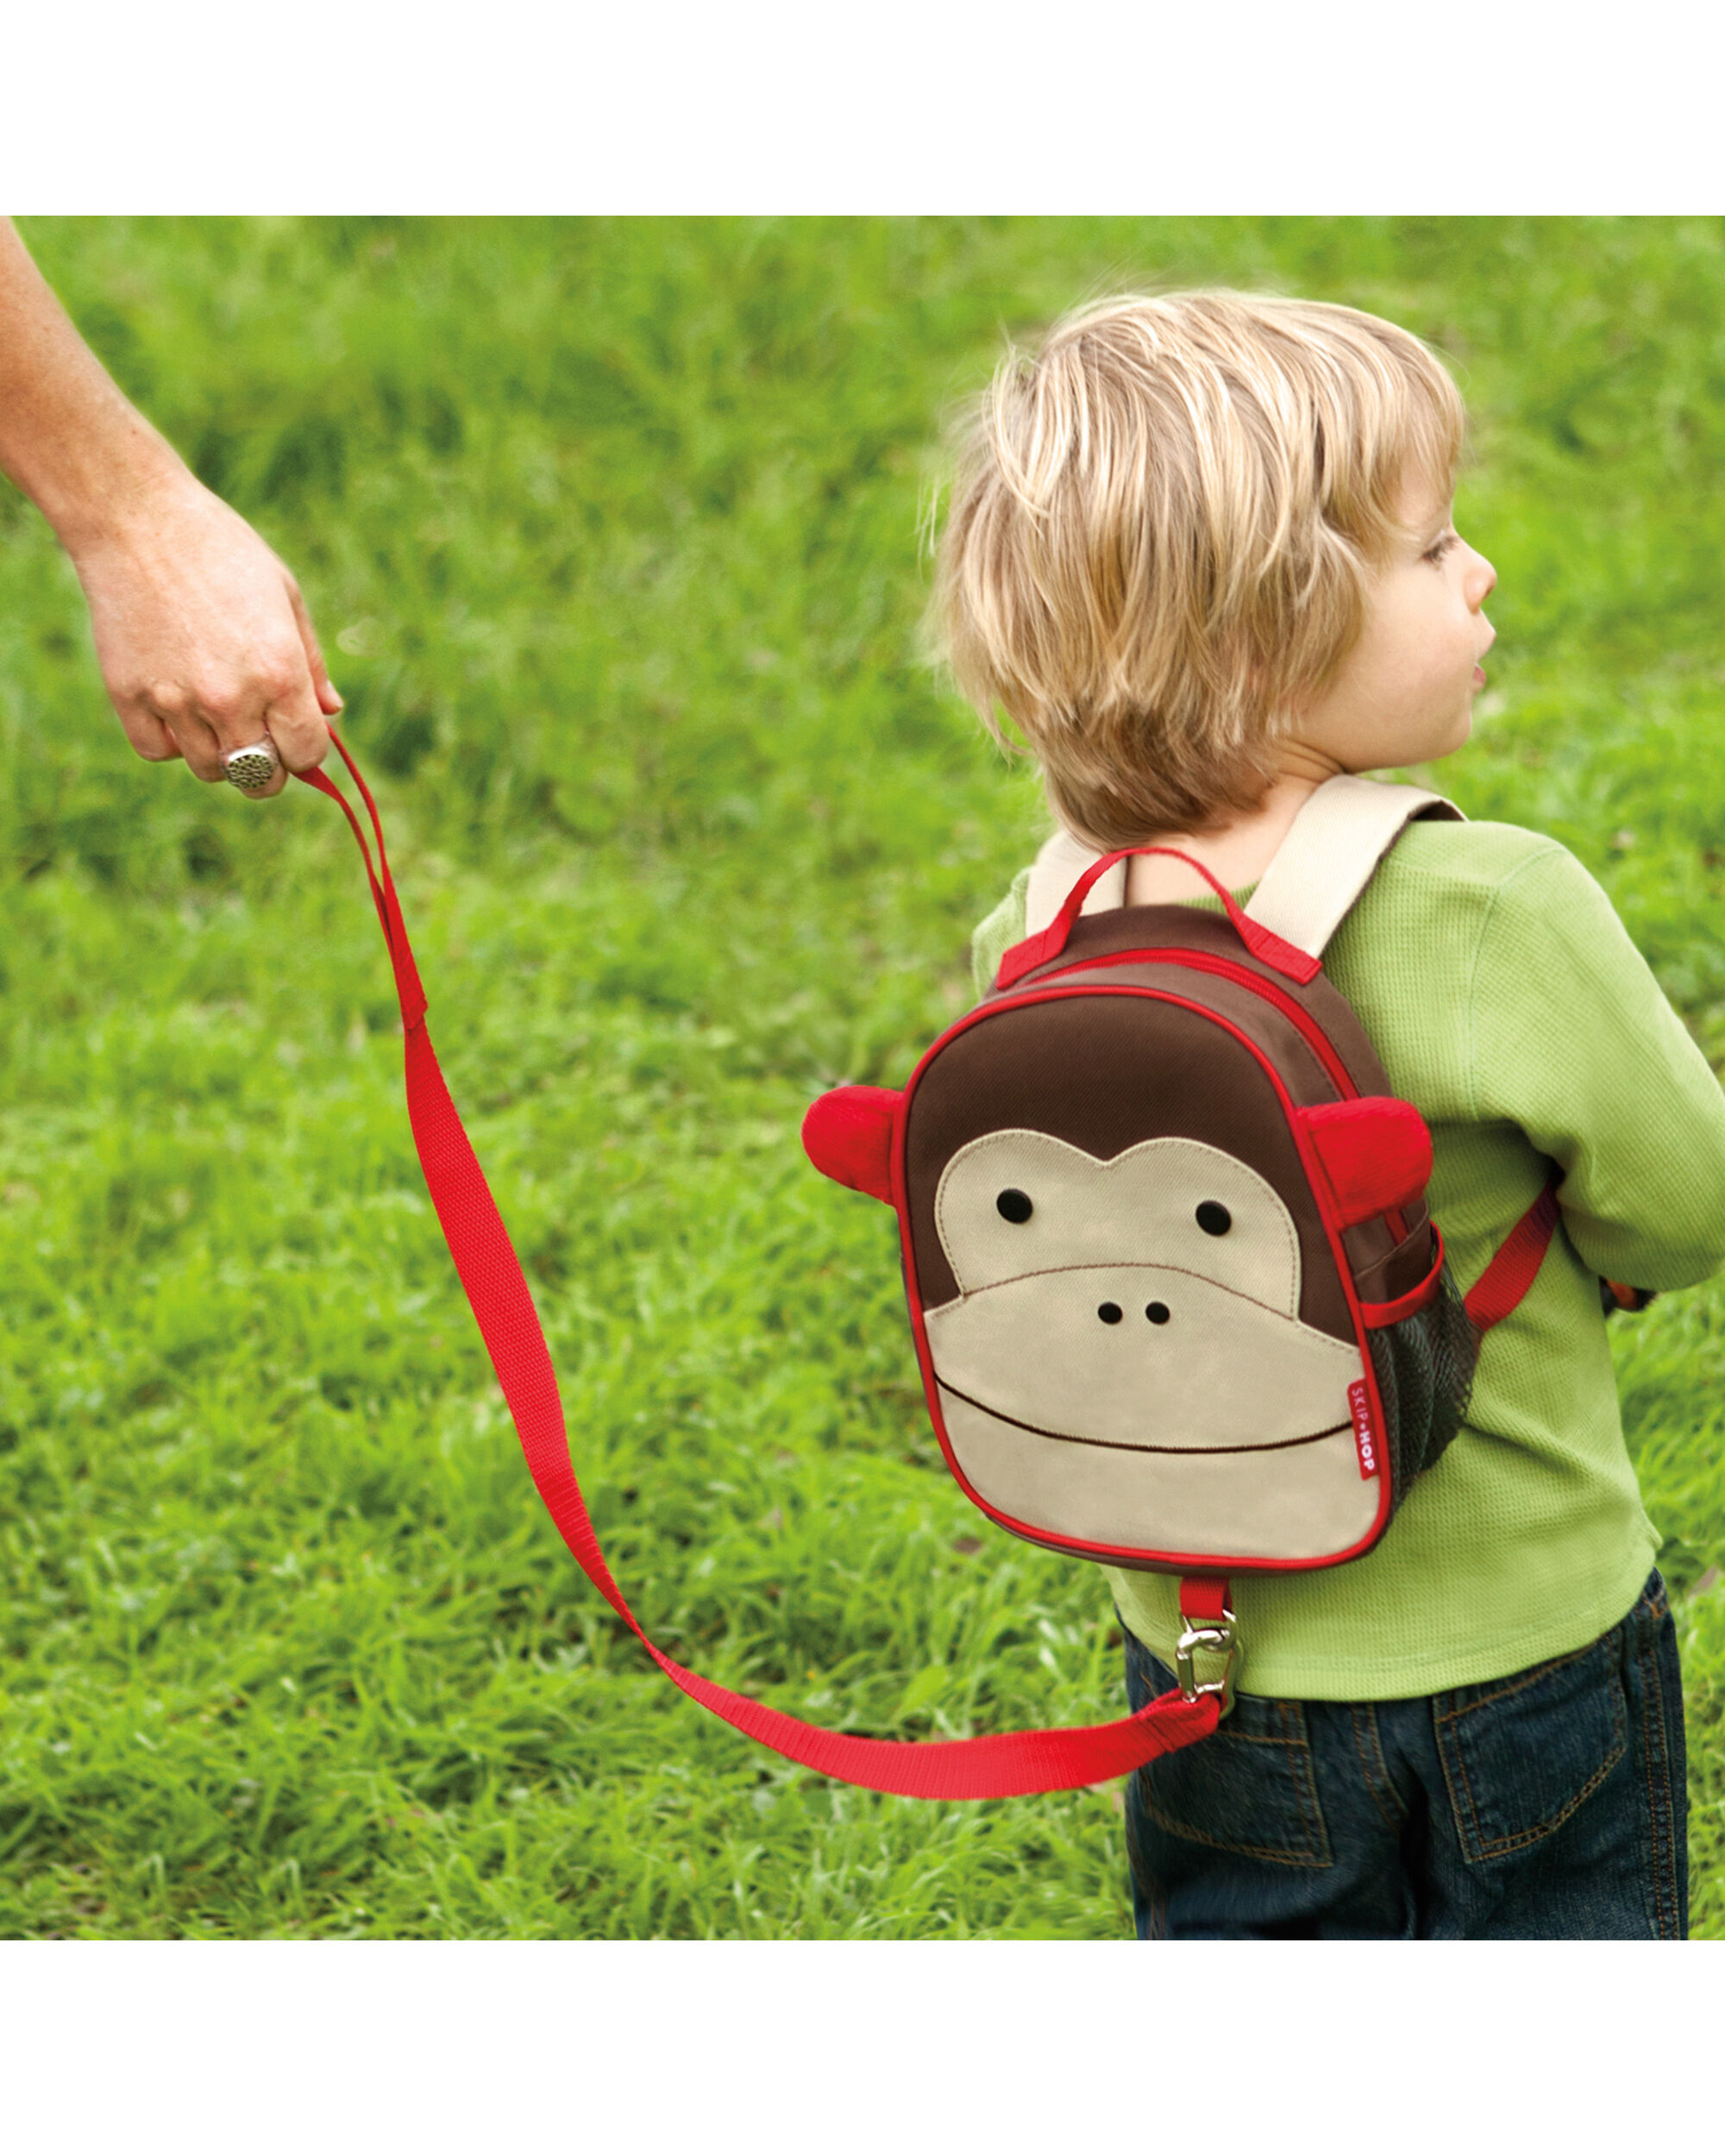 Monkey Mini Backpack With Safety Harness | skiphop.com